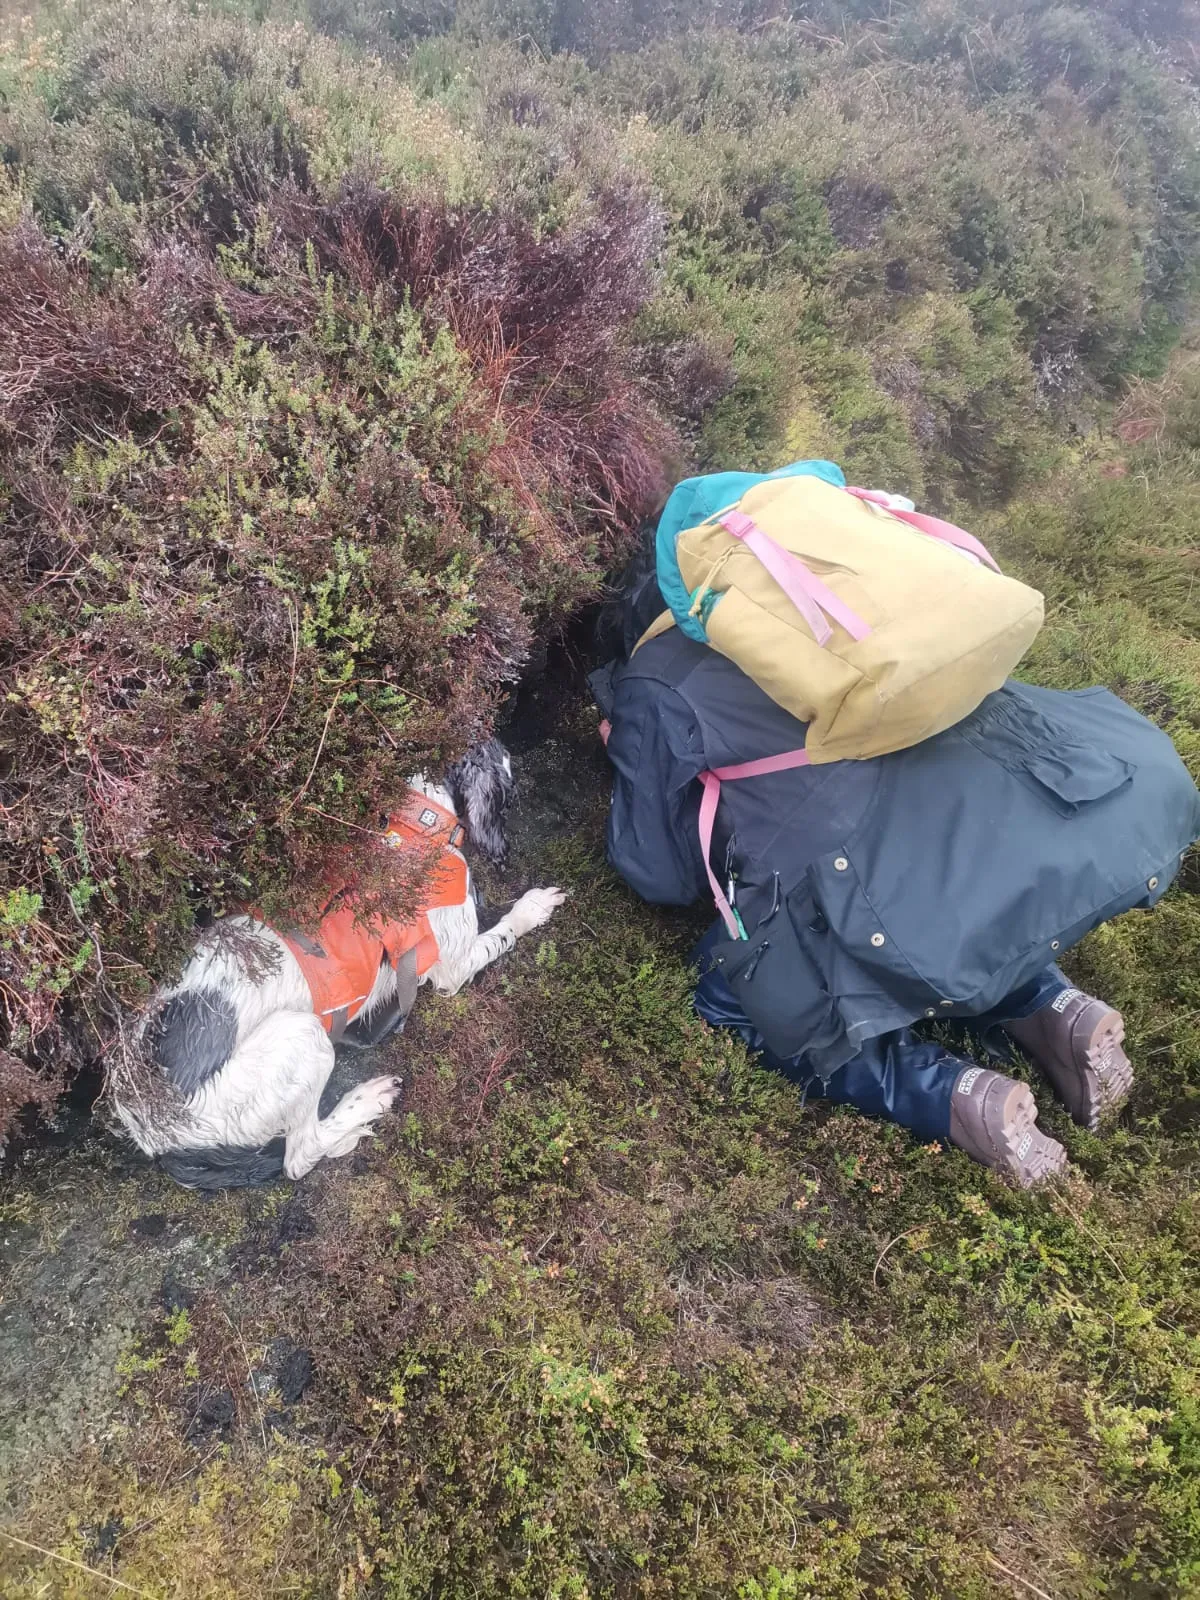 A dog and researcher search for Stoats in the undergrowth.